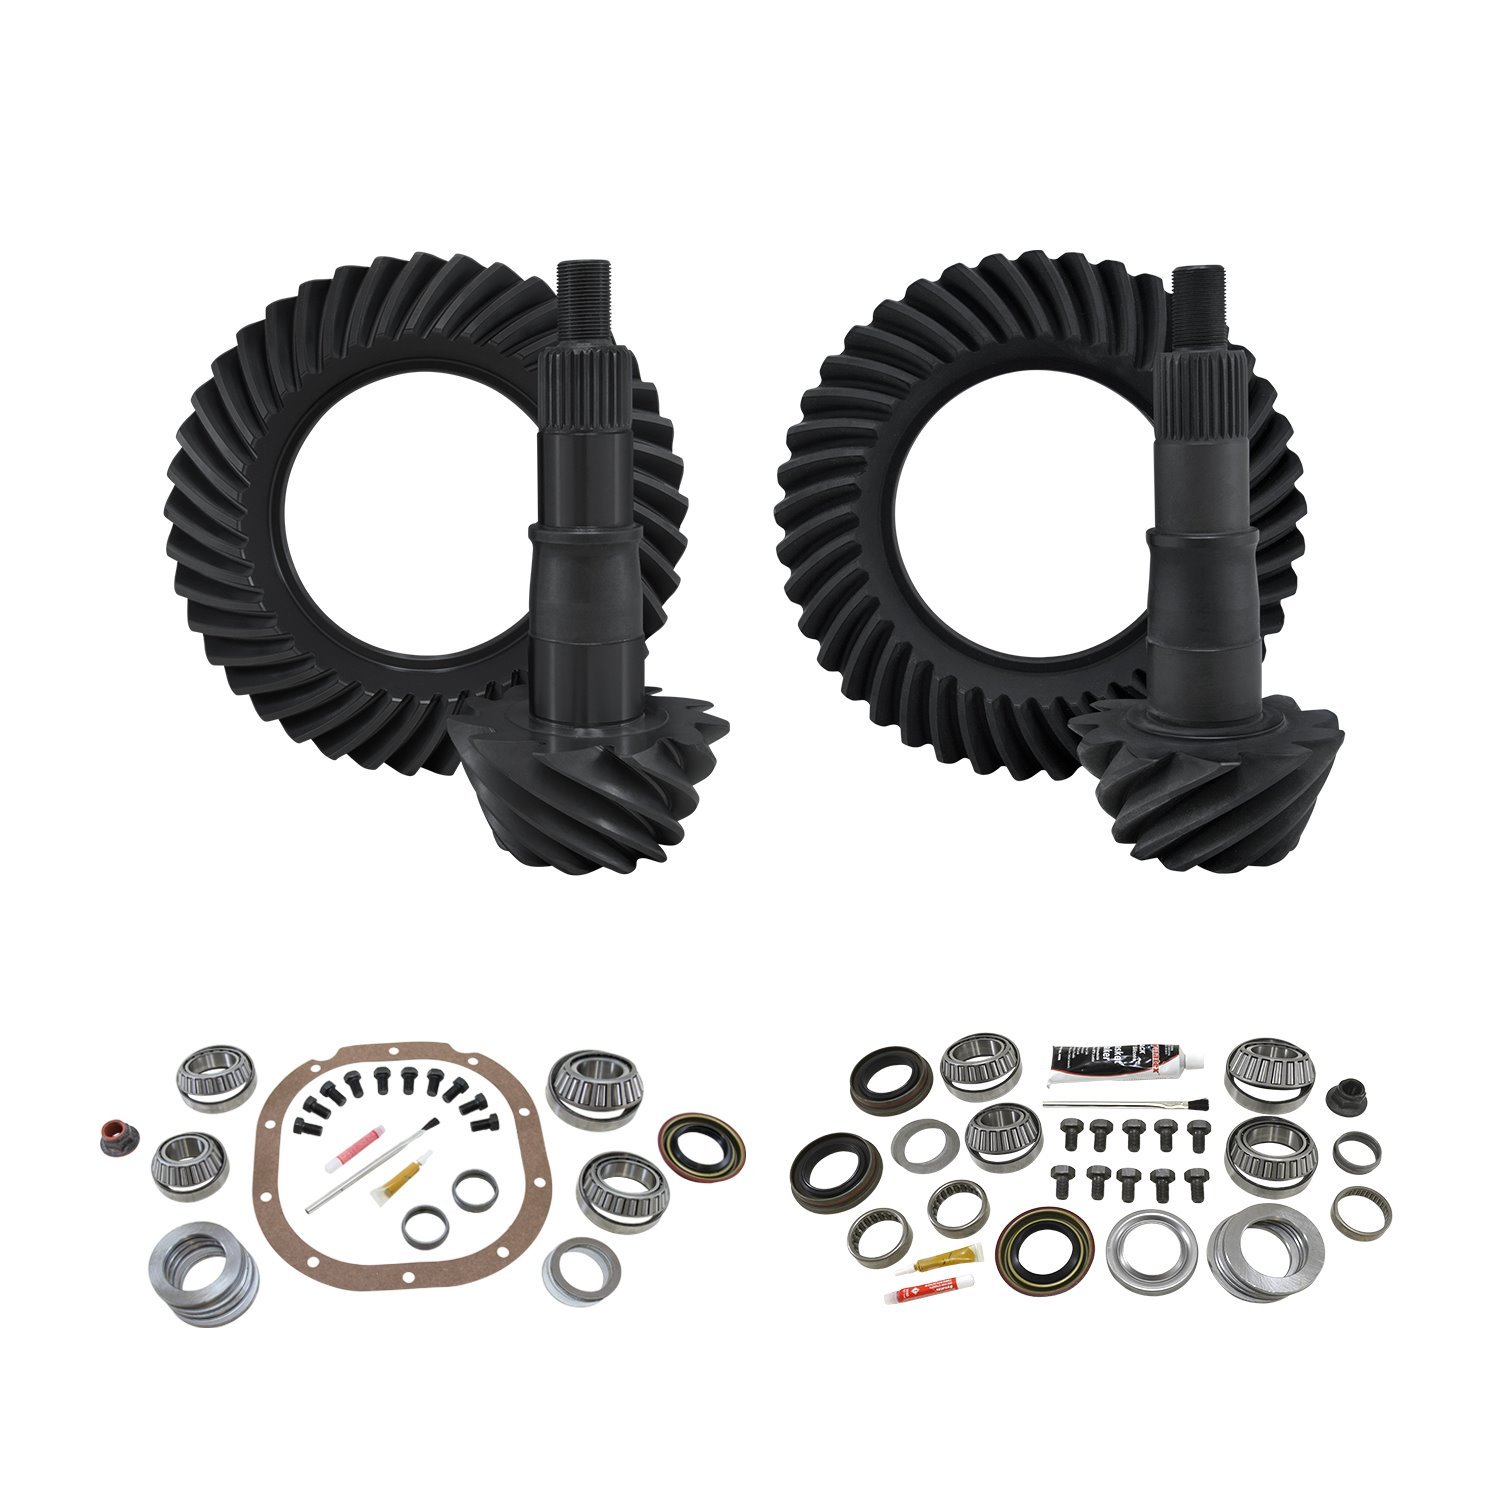 Re-Gear & Installation Kit, Ford 8.8 in., Various F150, 5.13 Ratio, Fr&Rr